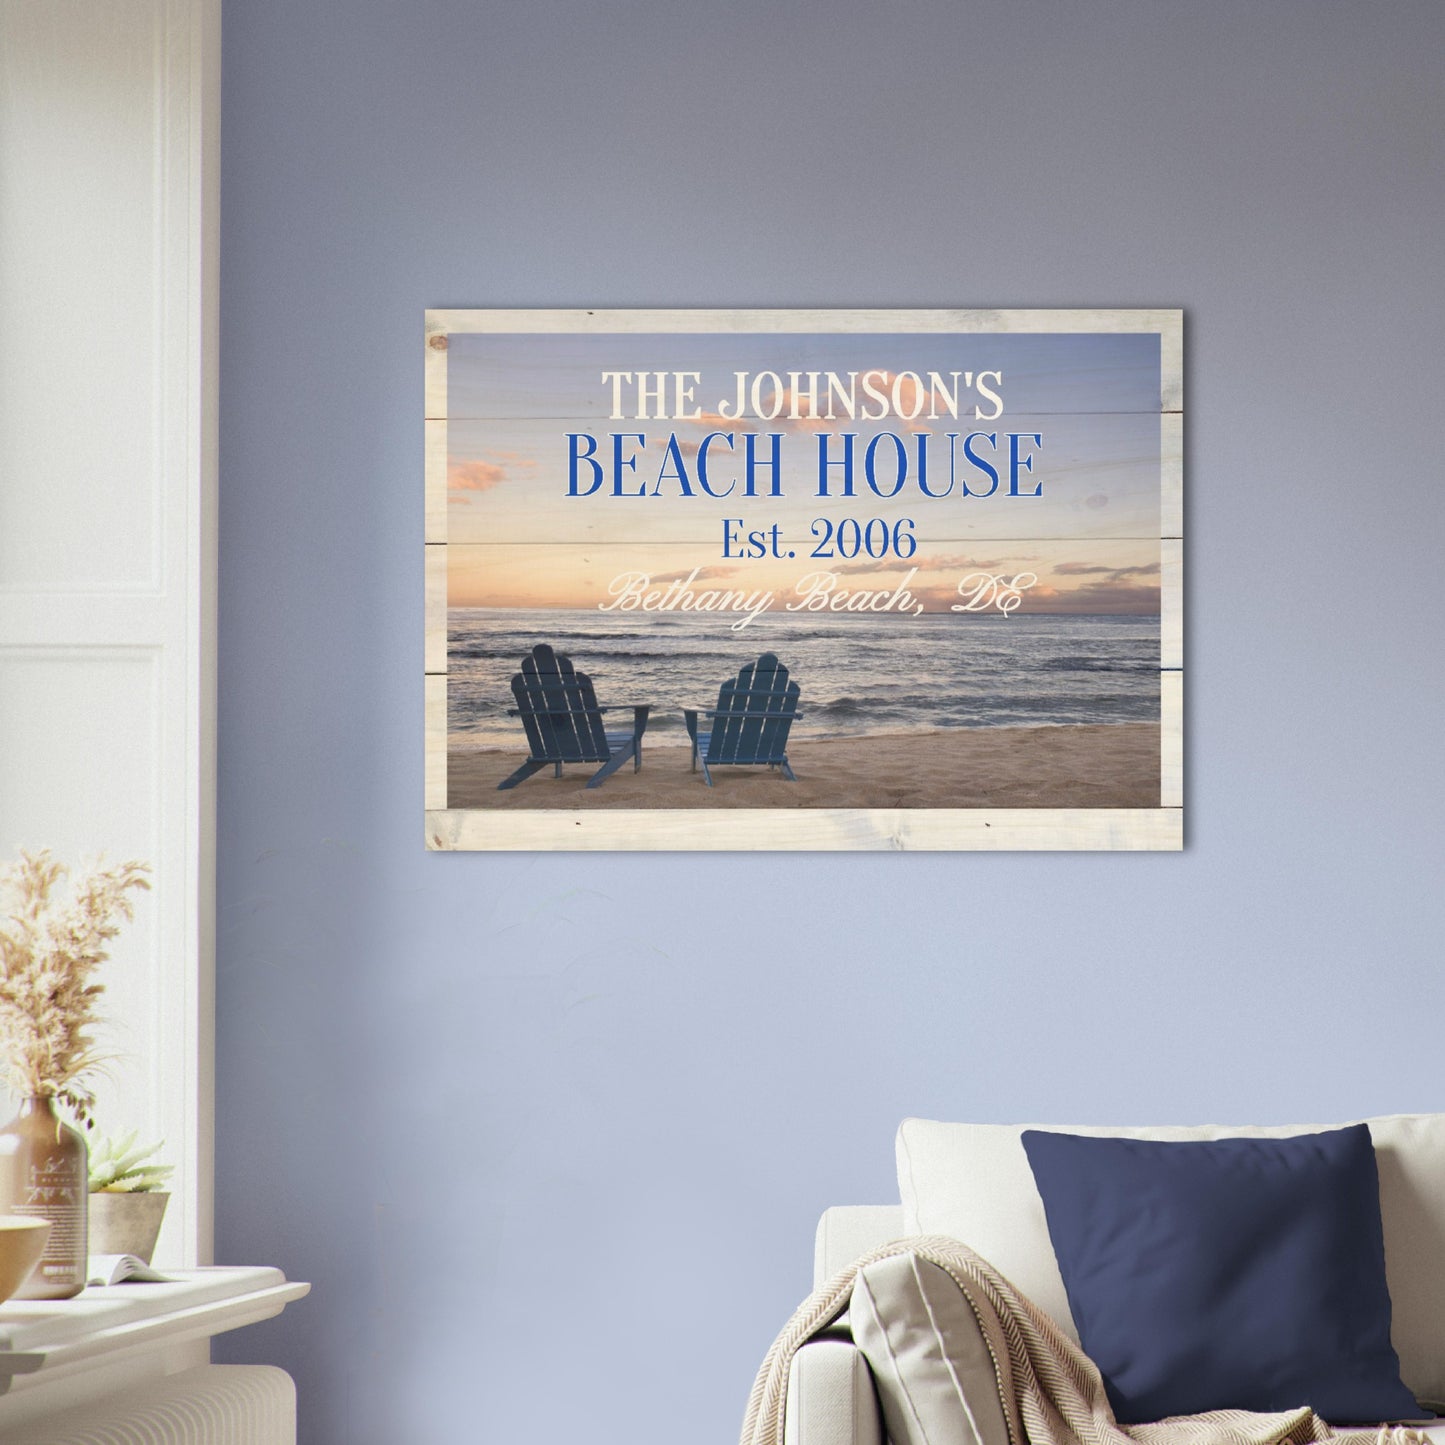 Personalized Wood Sign for your Beach House